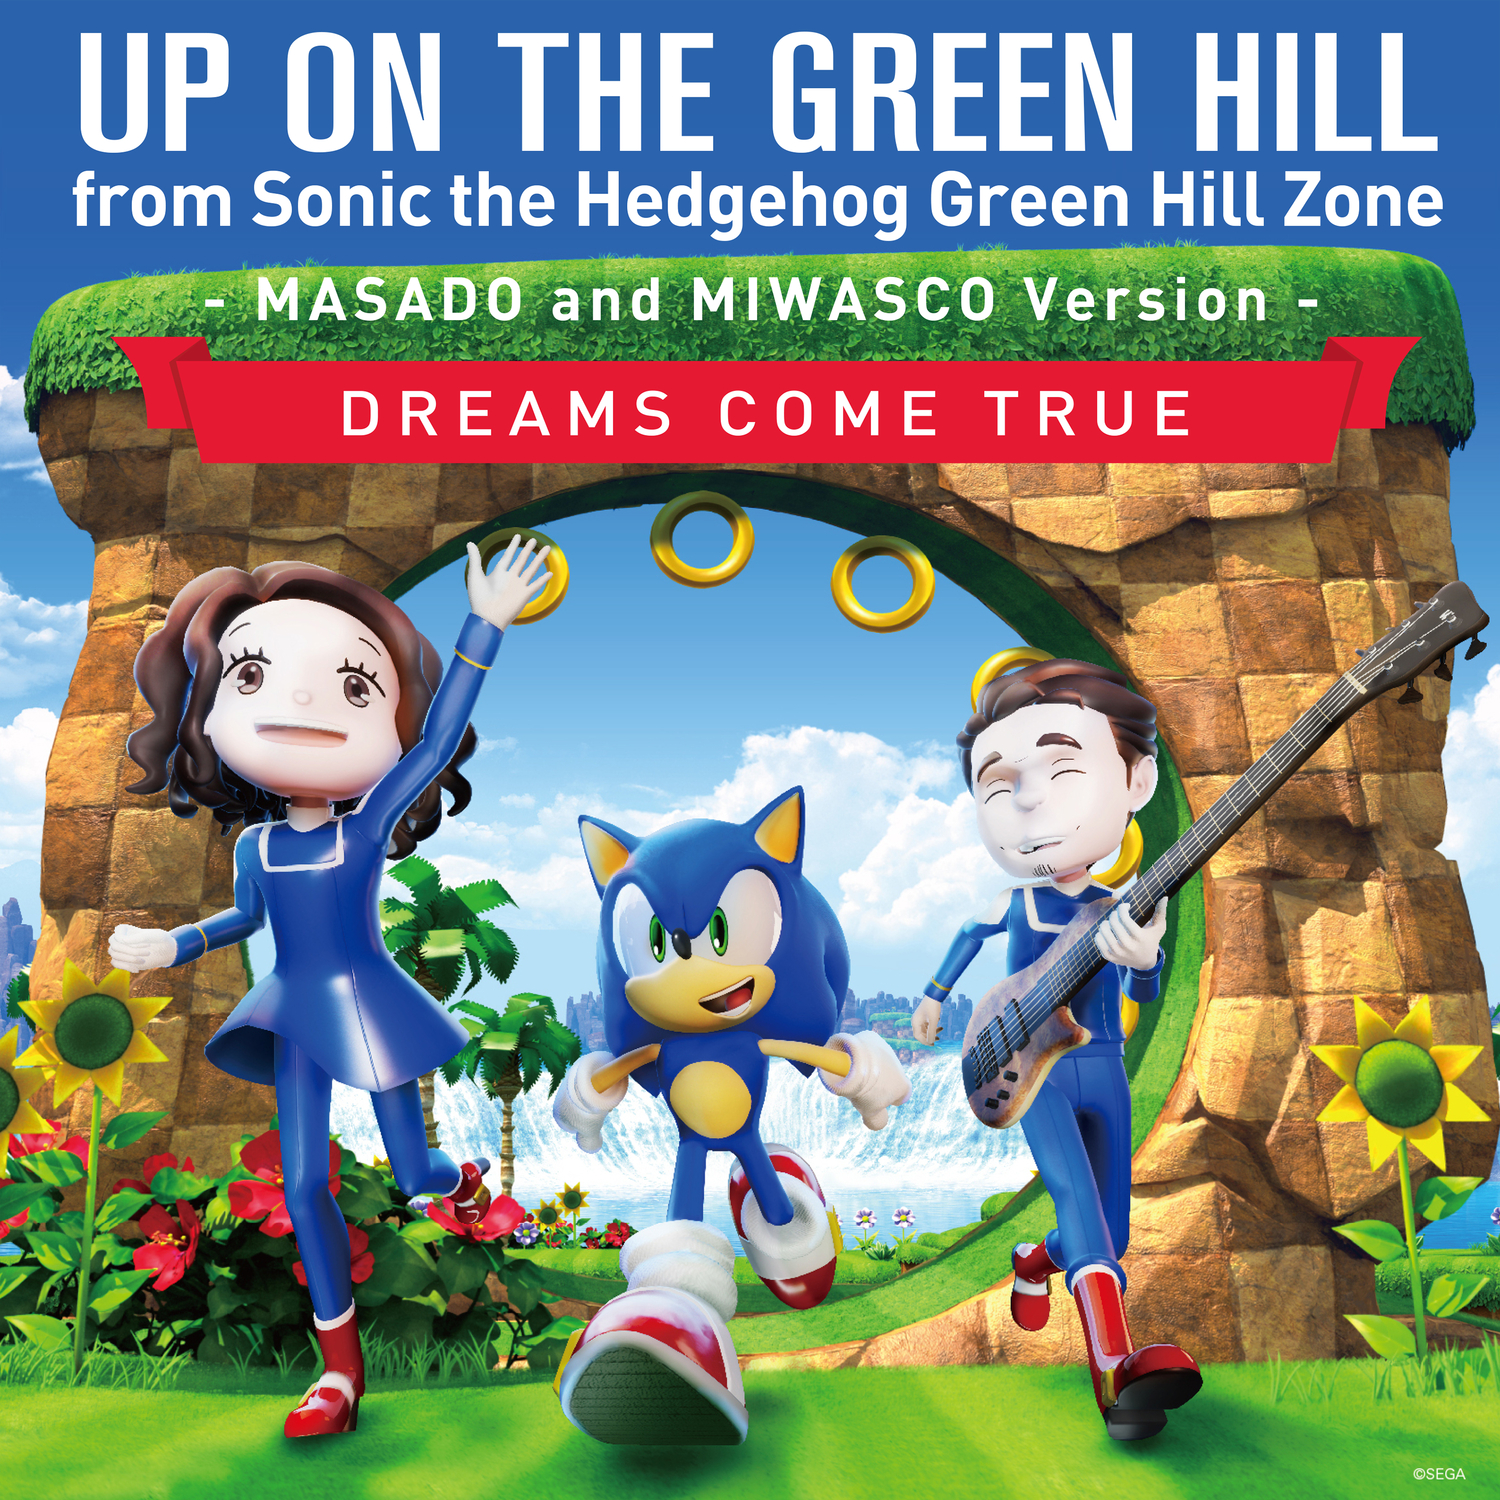 Green Hill Zone Official Resso - Create Music Produtions-NanaSonicMusicTH  Productions - Listening To Music On Resso